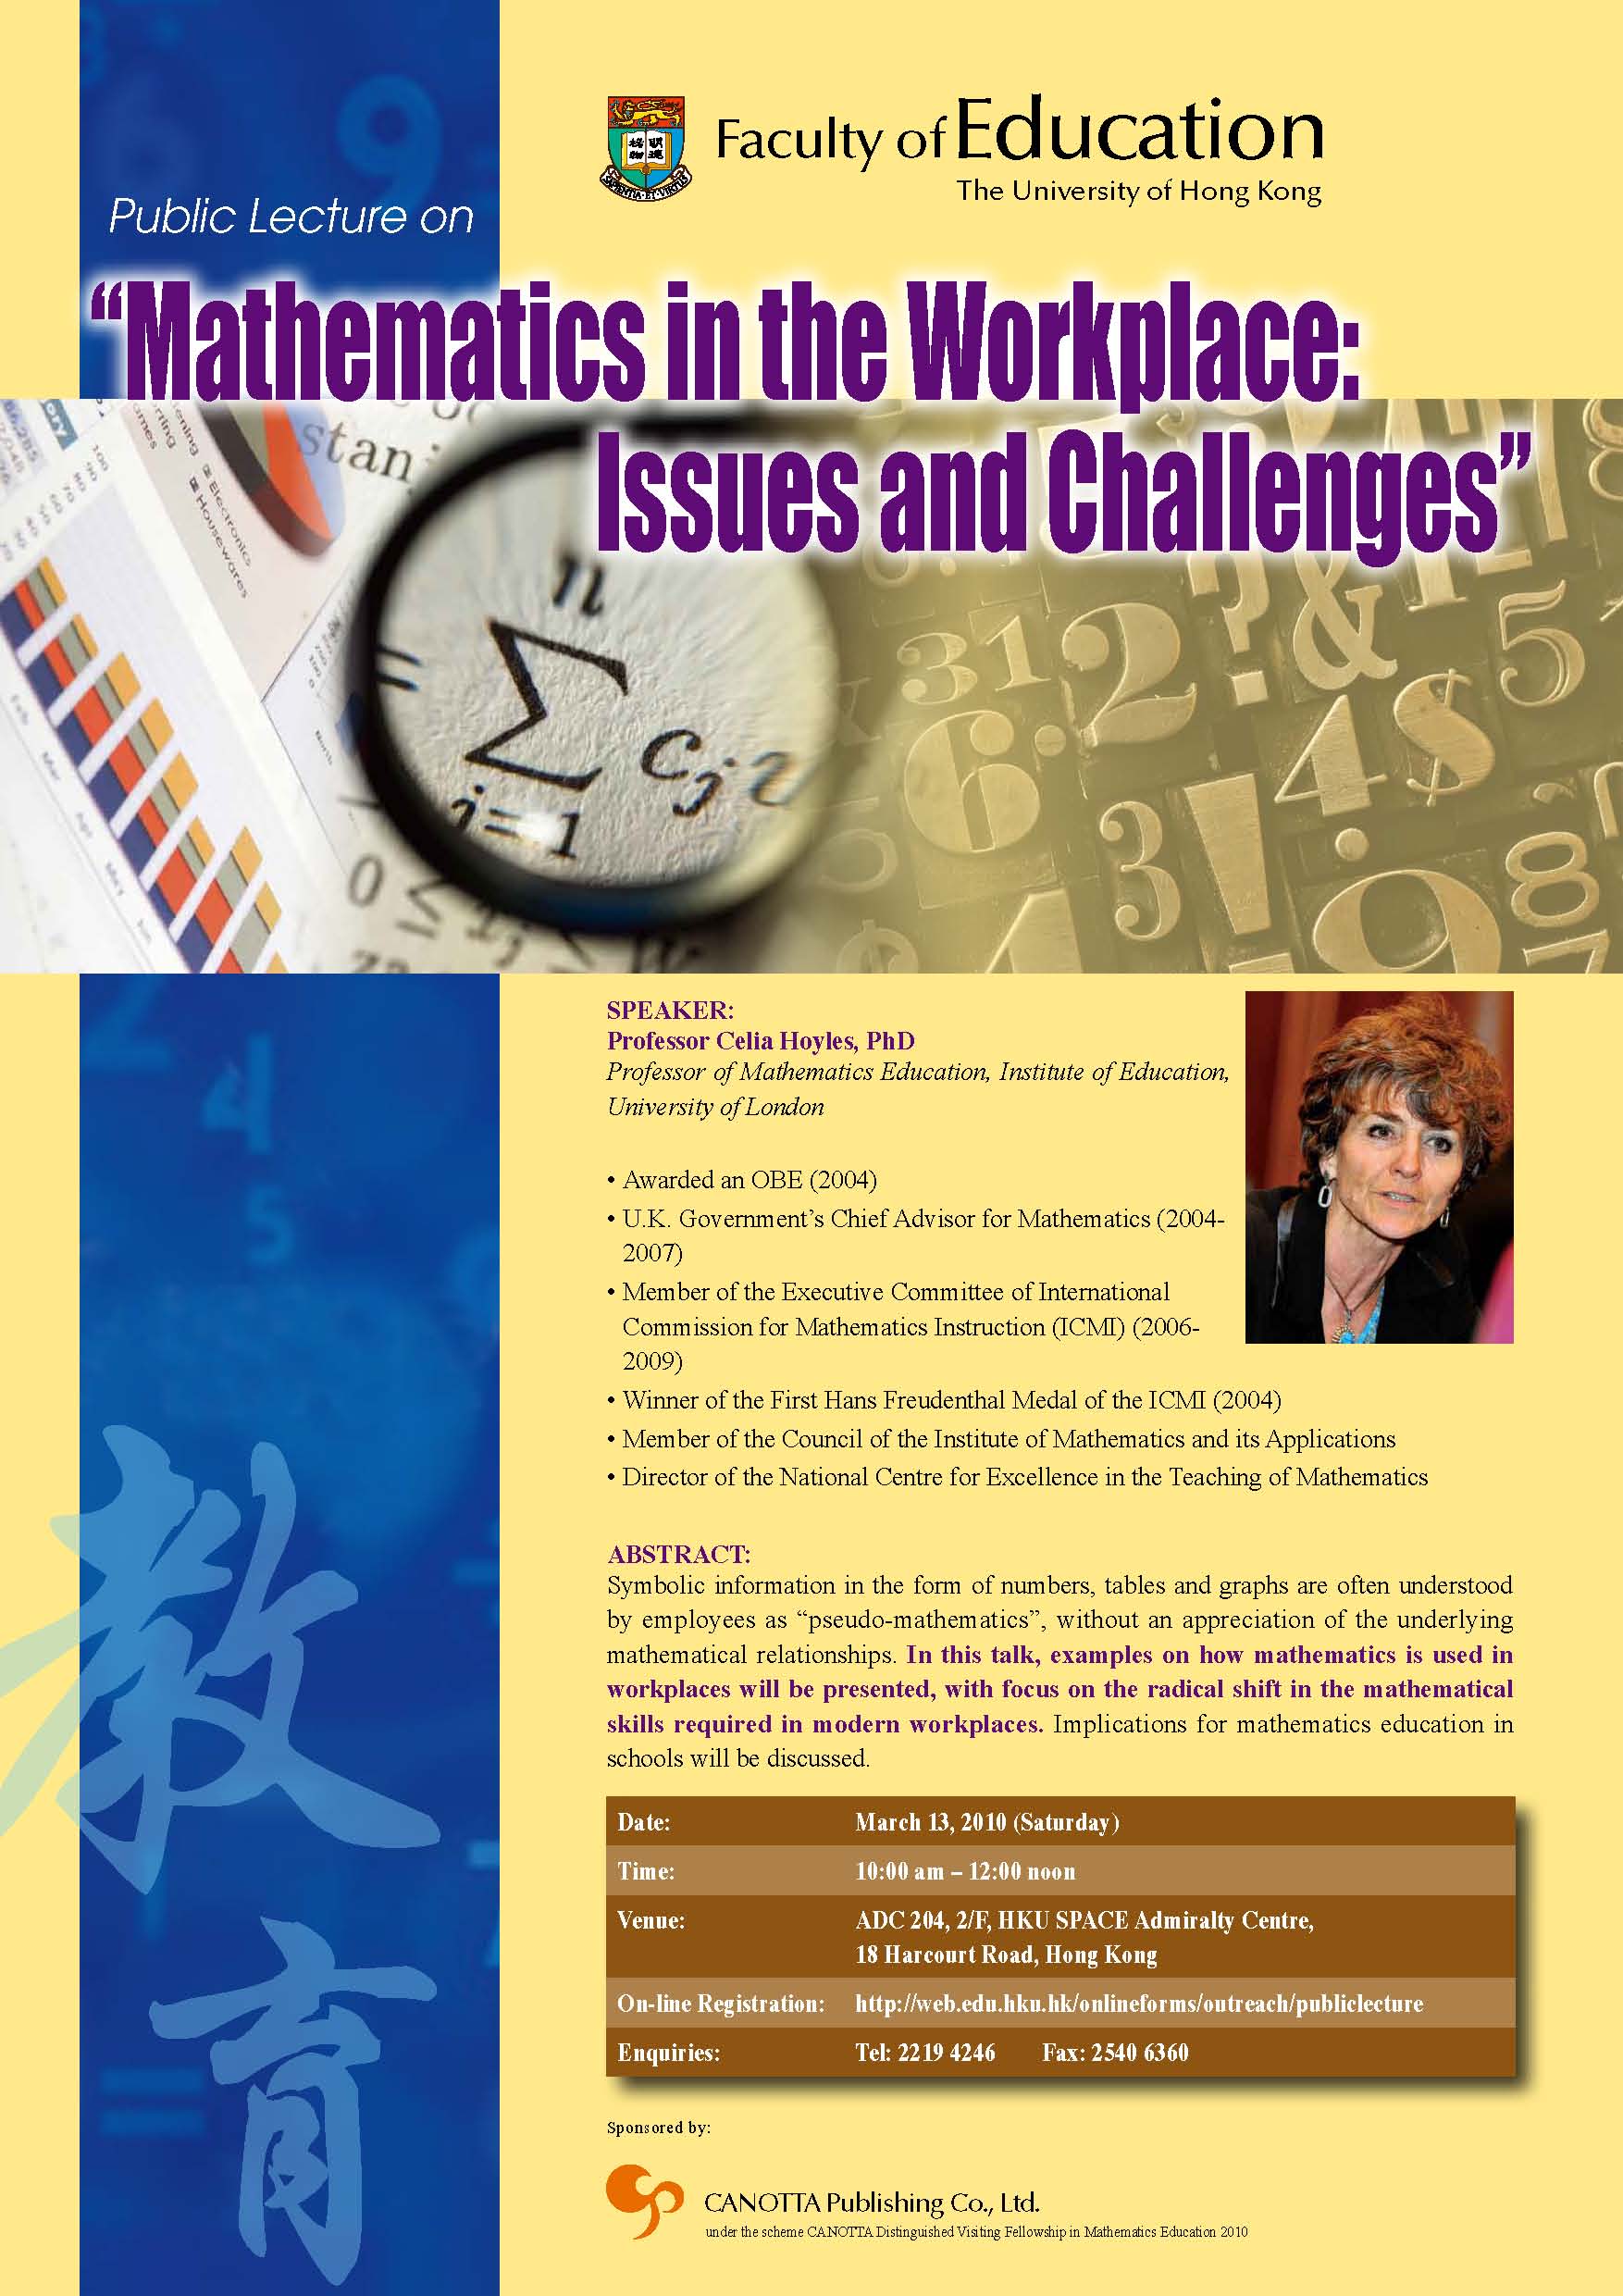 Mathematics in the Workplace: Issues and Challenges